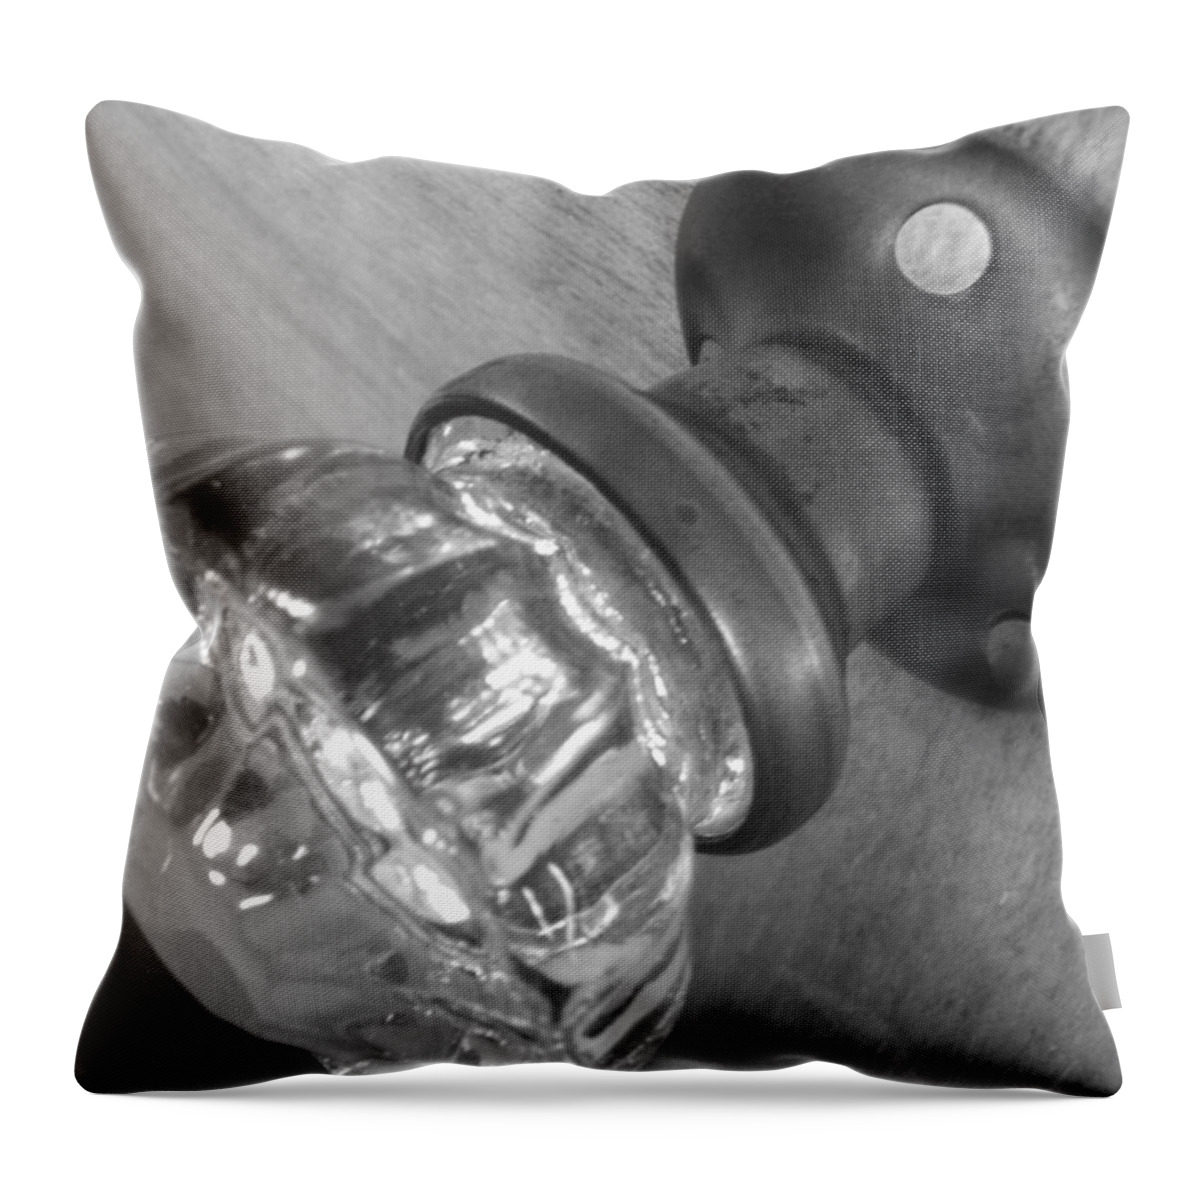 Doorknob Throw Pillow featuring the photograph Glass by Marilyn Diaz